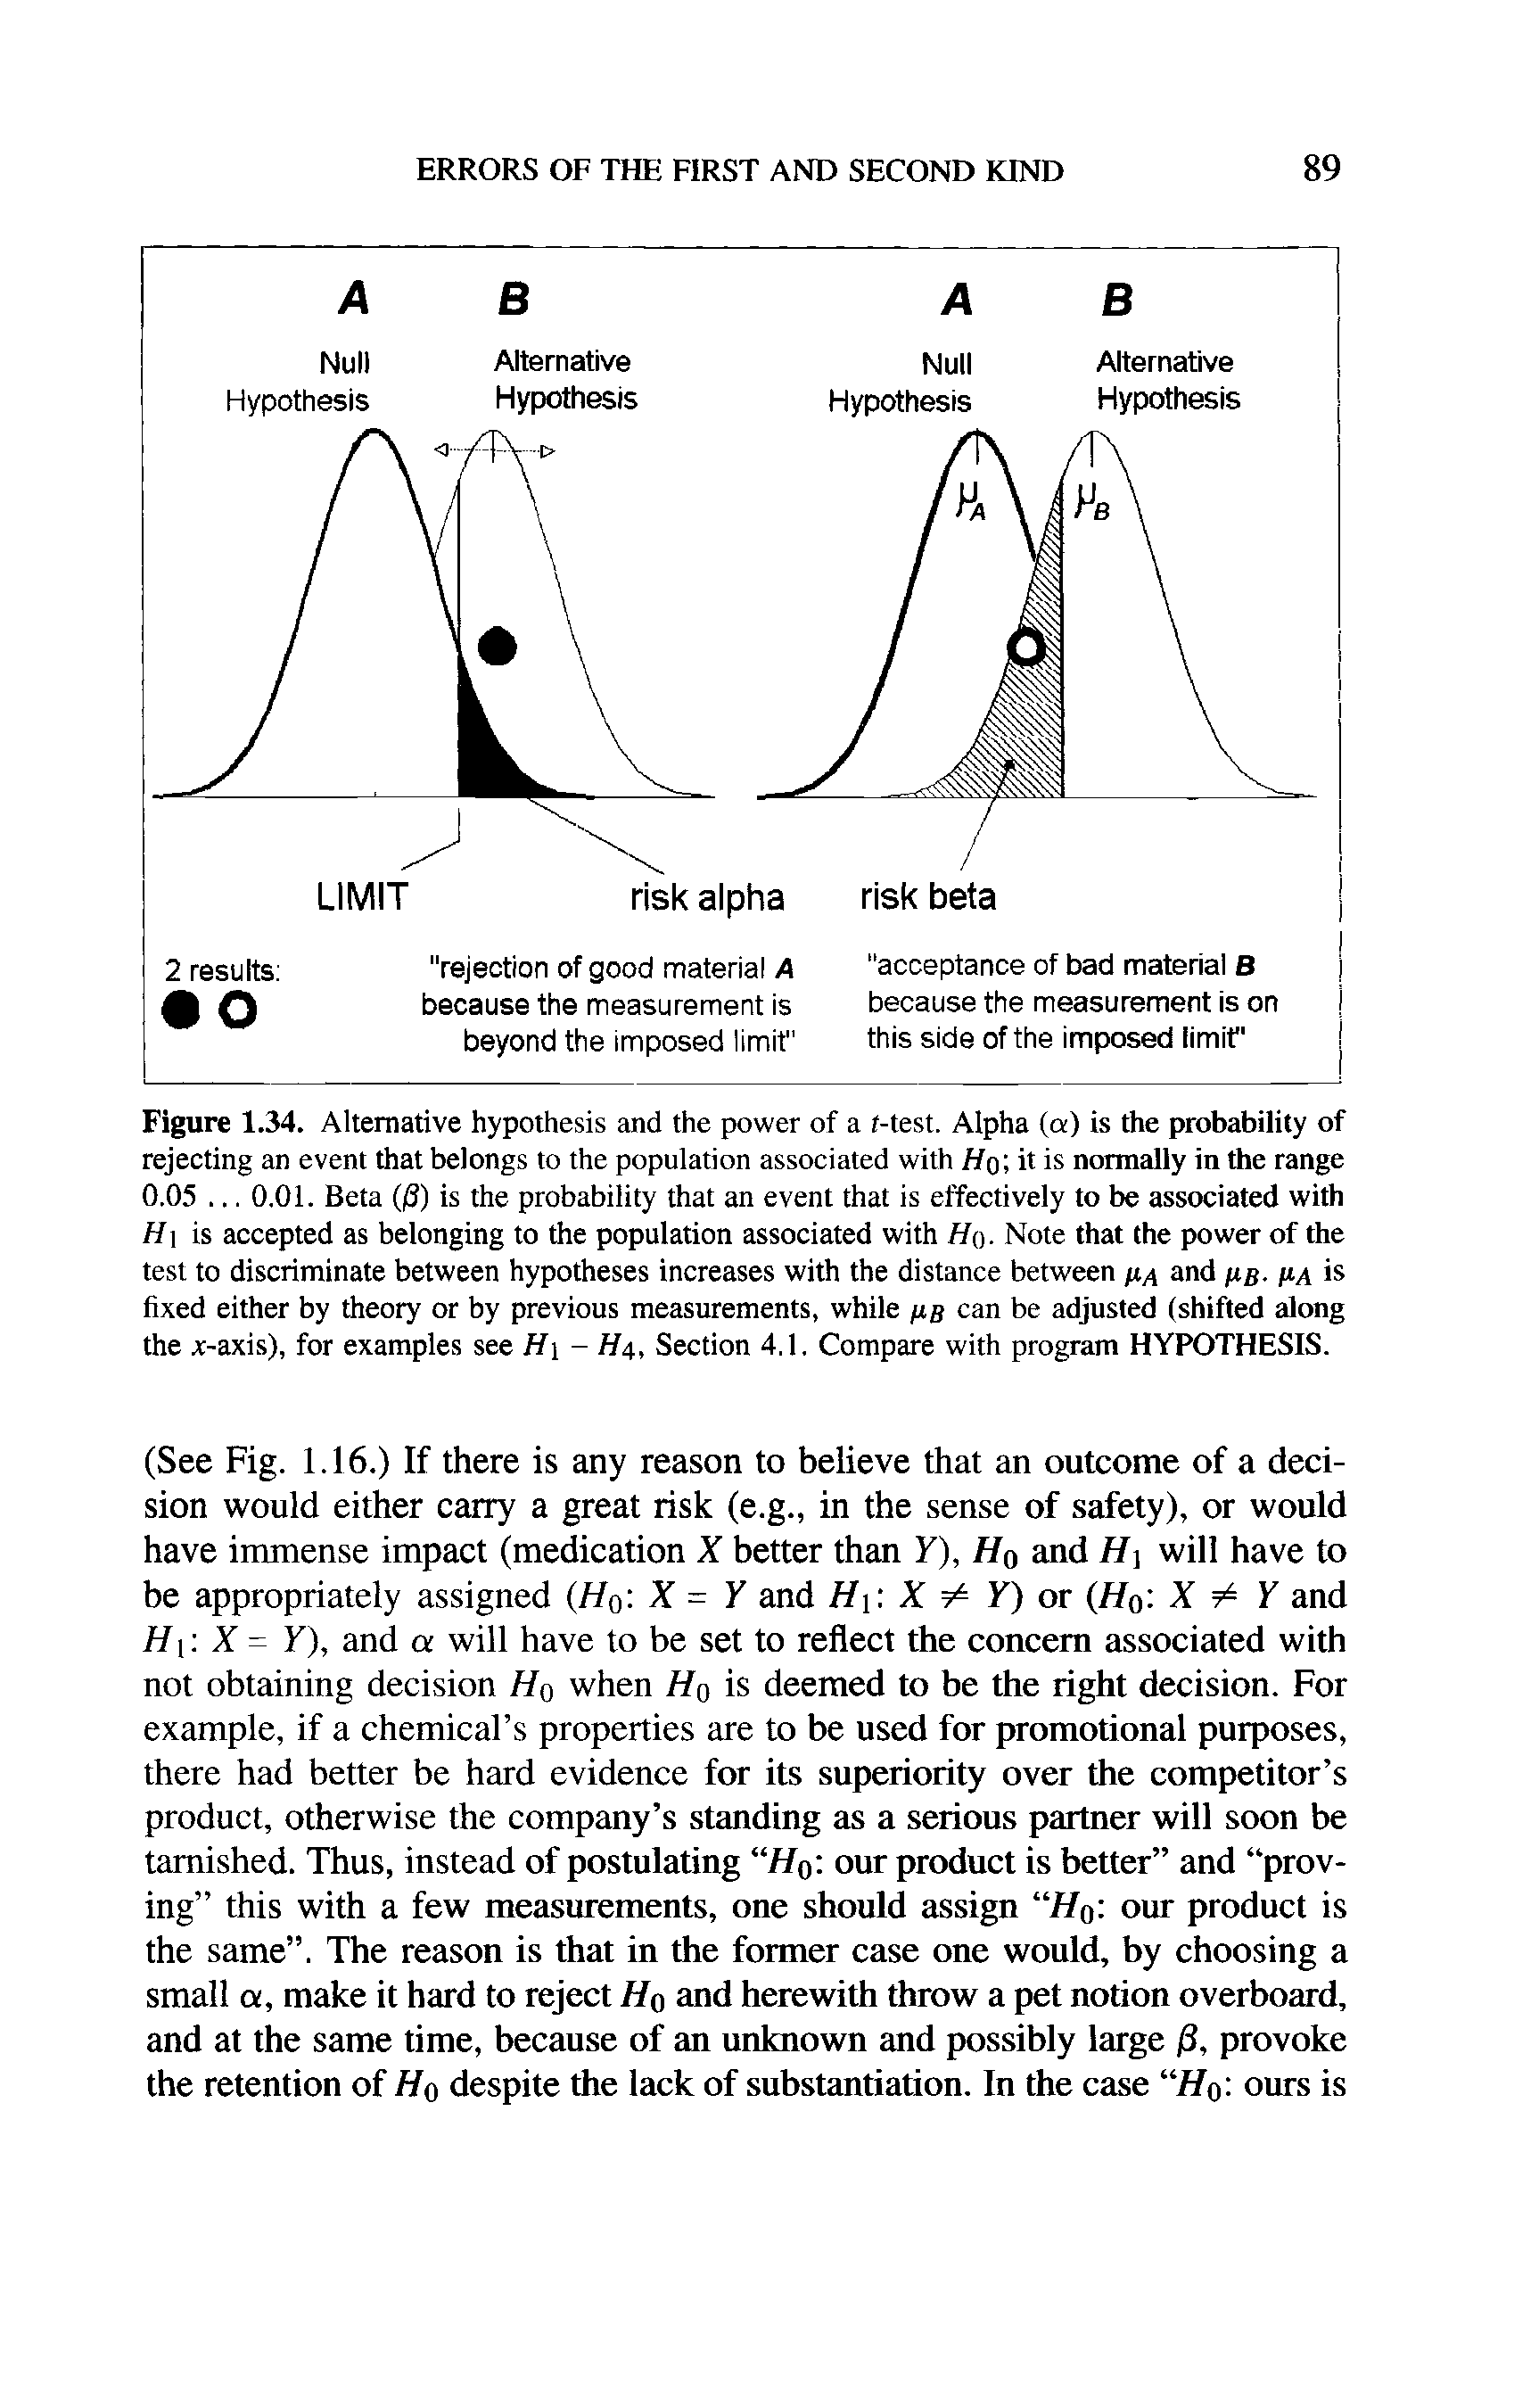 Figure 1.34. Alternative hypothesis and the power of a t-test. Alpha (a) is the probability of rejecting an event that belongs to the population associated with it is normally in the range 0.05. .. 0.01. Beta (/3) is the probability that an event that is effectively to be associated with H is accepted as belonging to the population associated with Hq. Note that the power of the test to discriminate between hypotheses increases with the distance between ha and hb- >-a is fixed either by theory or by previous measurements, while hb can be adjusted (shifted along the x-axis), for examples see H - H4, Section 4.1. Compare with program HYPOTHESIS.